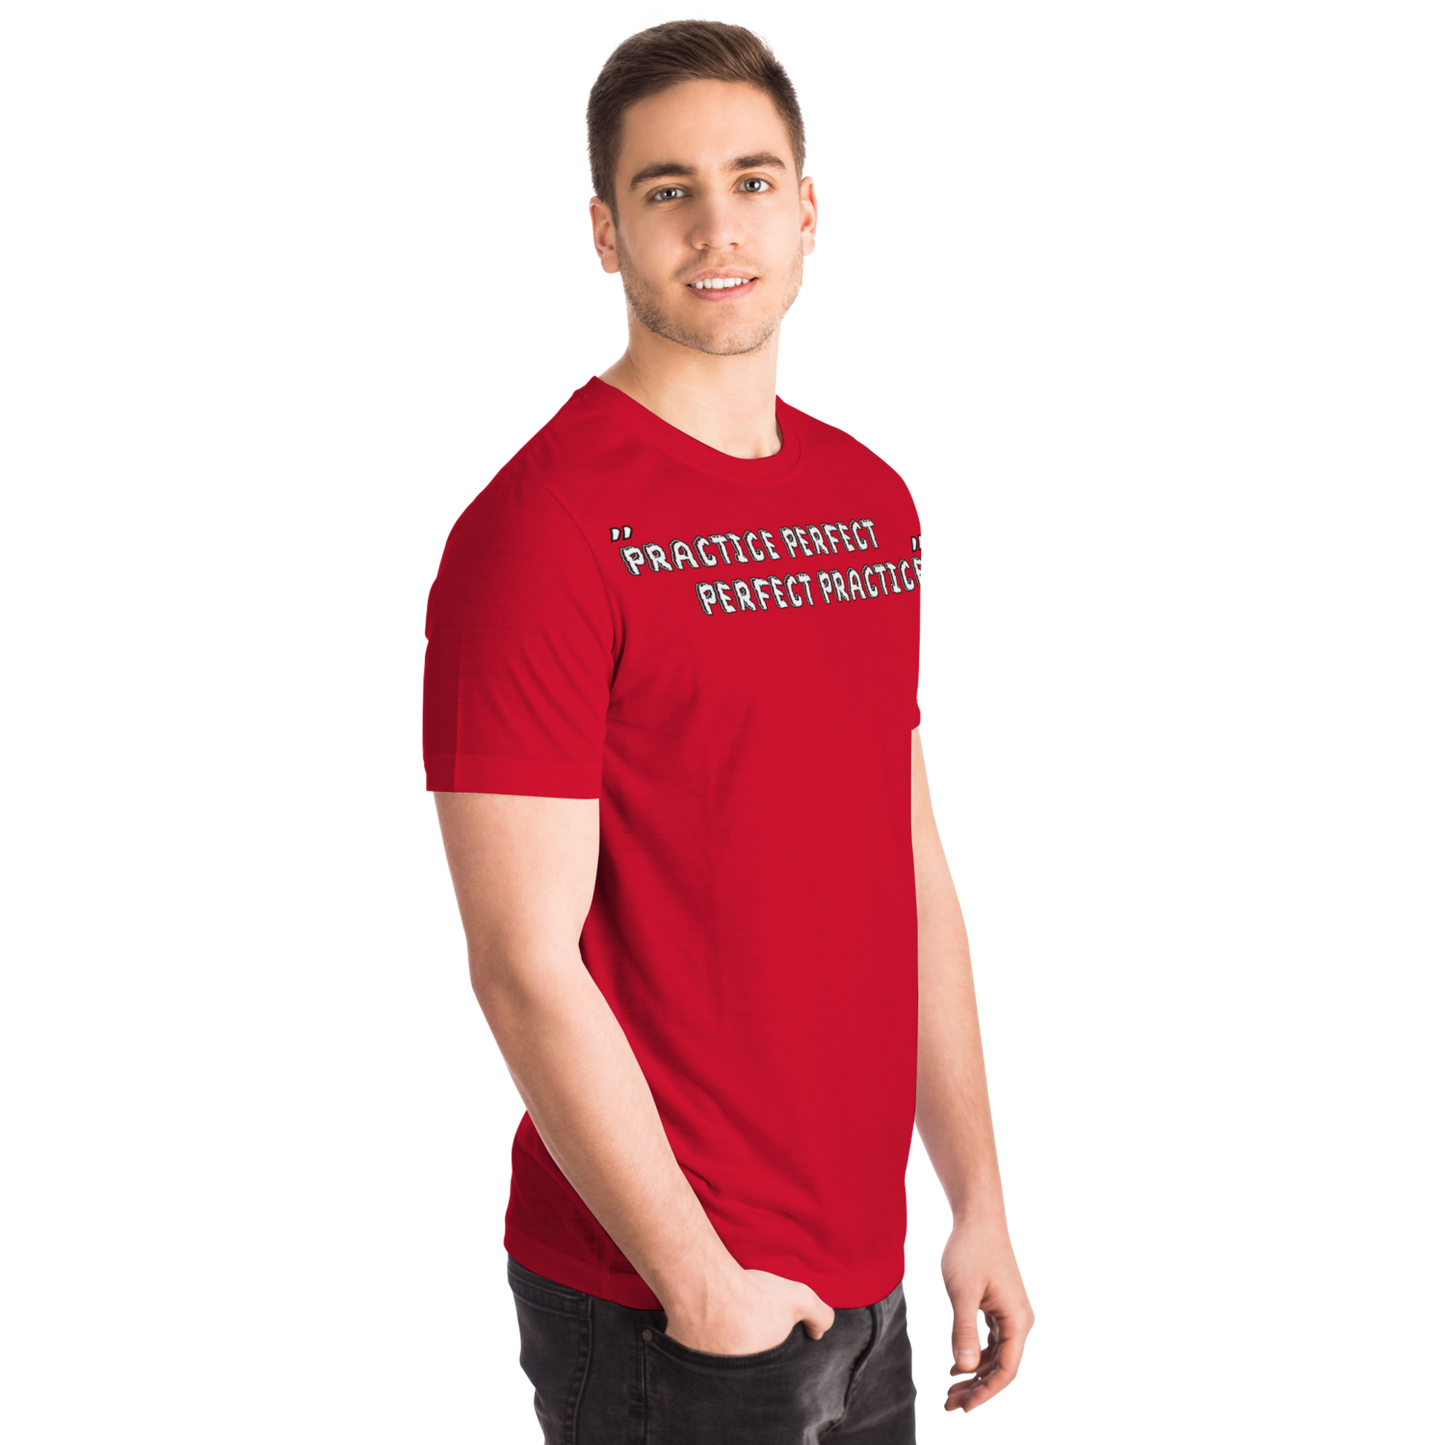 Practice Perfect Winners Win T-Shirt Red